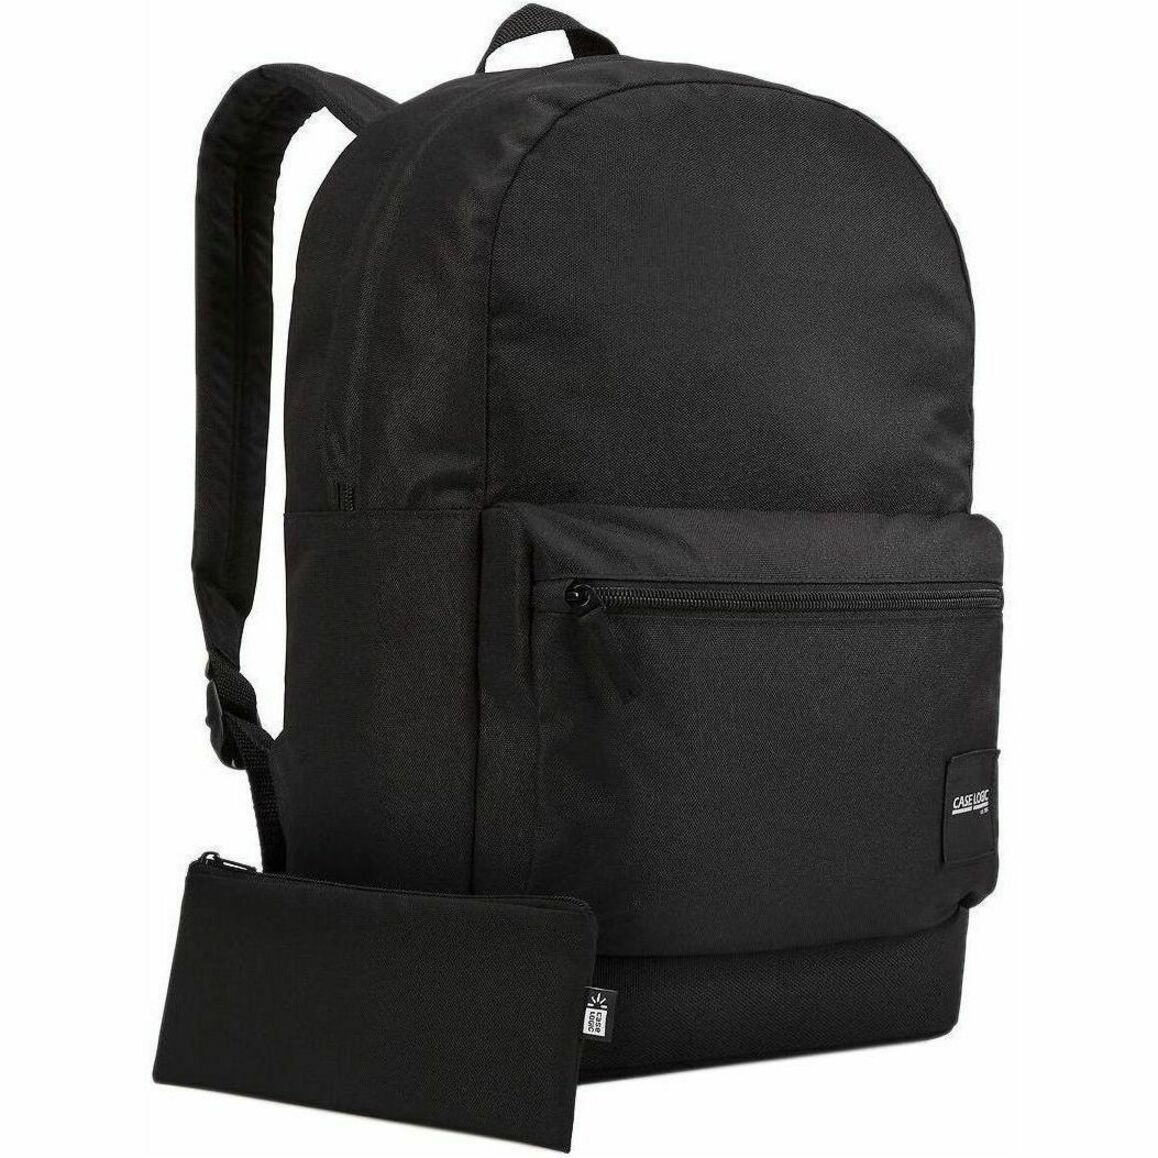 Case Logic Commence CCAM-1216 Carrying Case (Backpack) for 15.6" Notebook Electronics Book Folder Water Bottle Accessories - Black